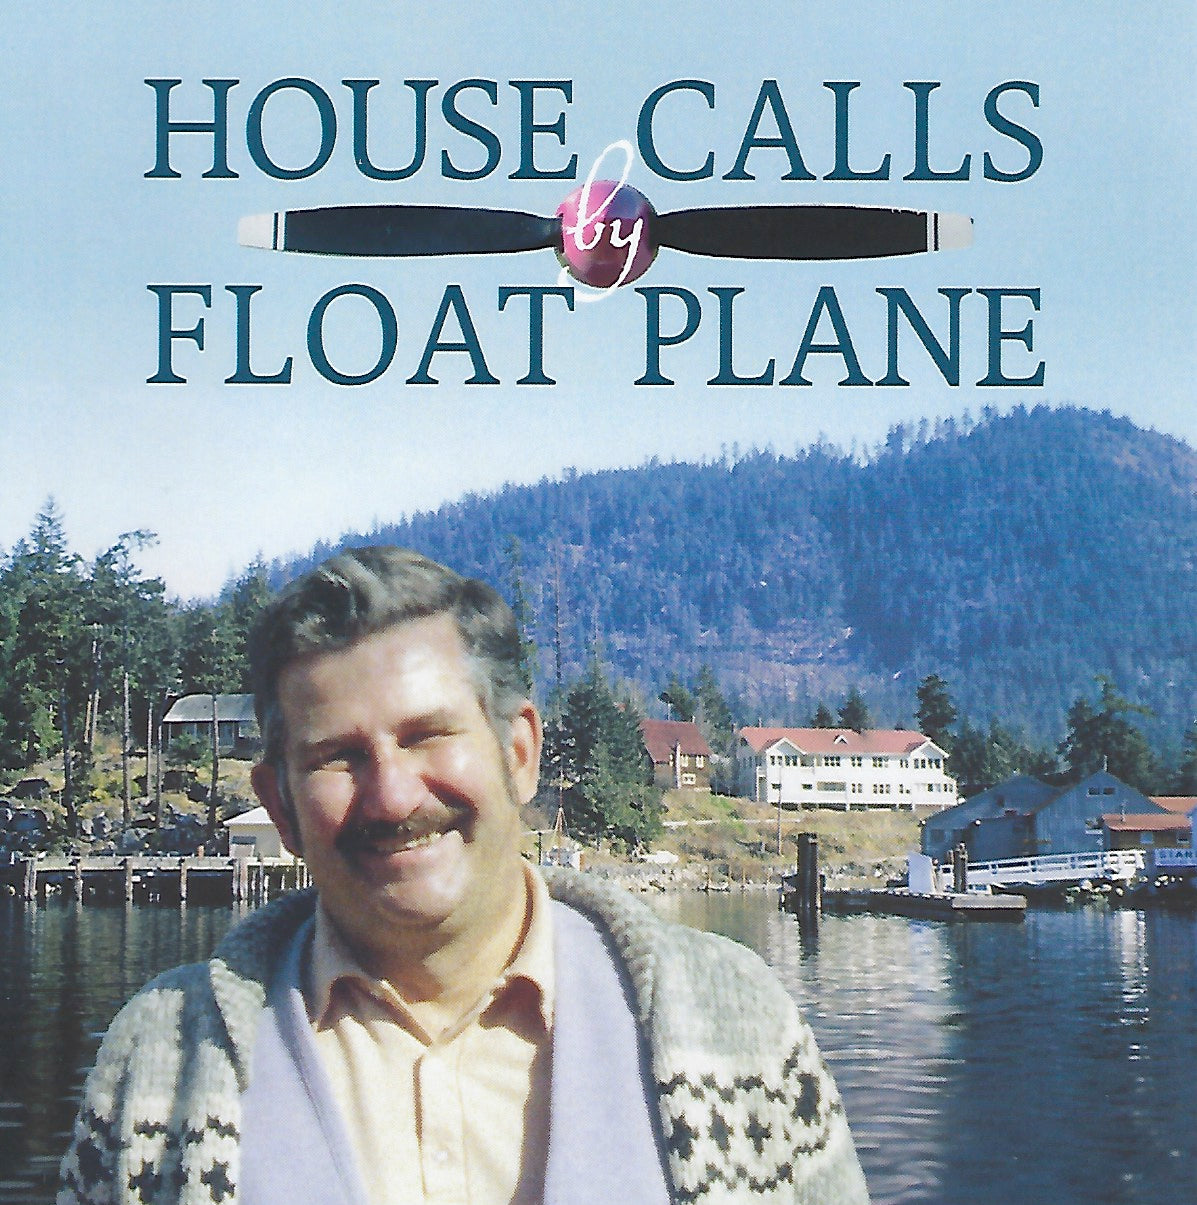 House Calls by Float Plane (by Alan Swan, MD)